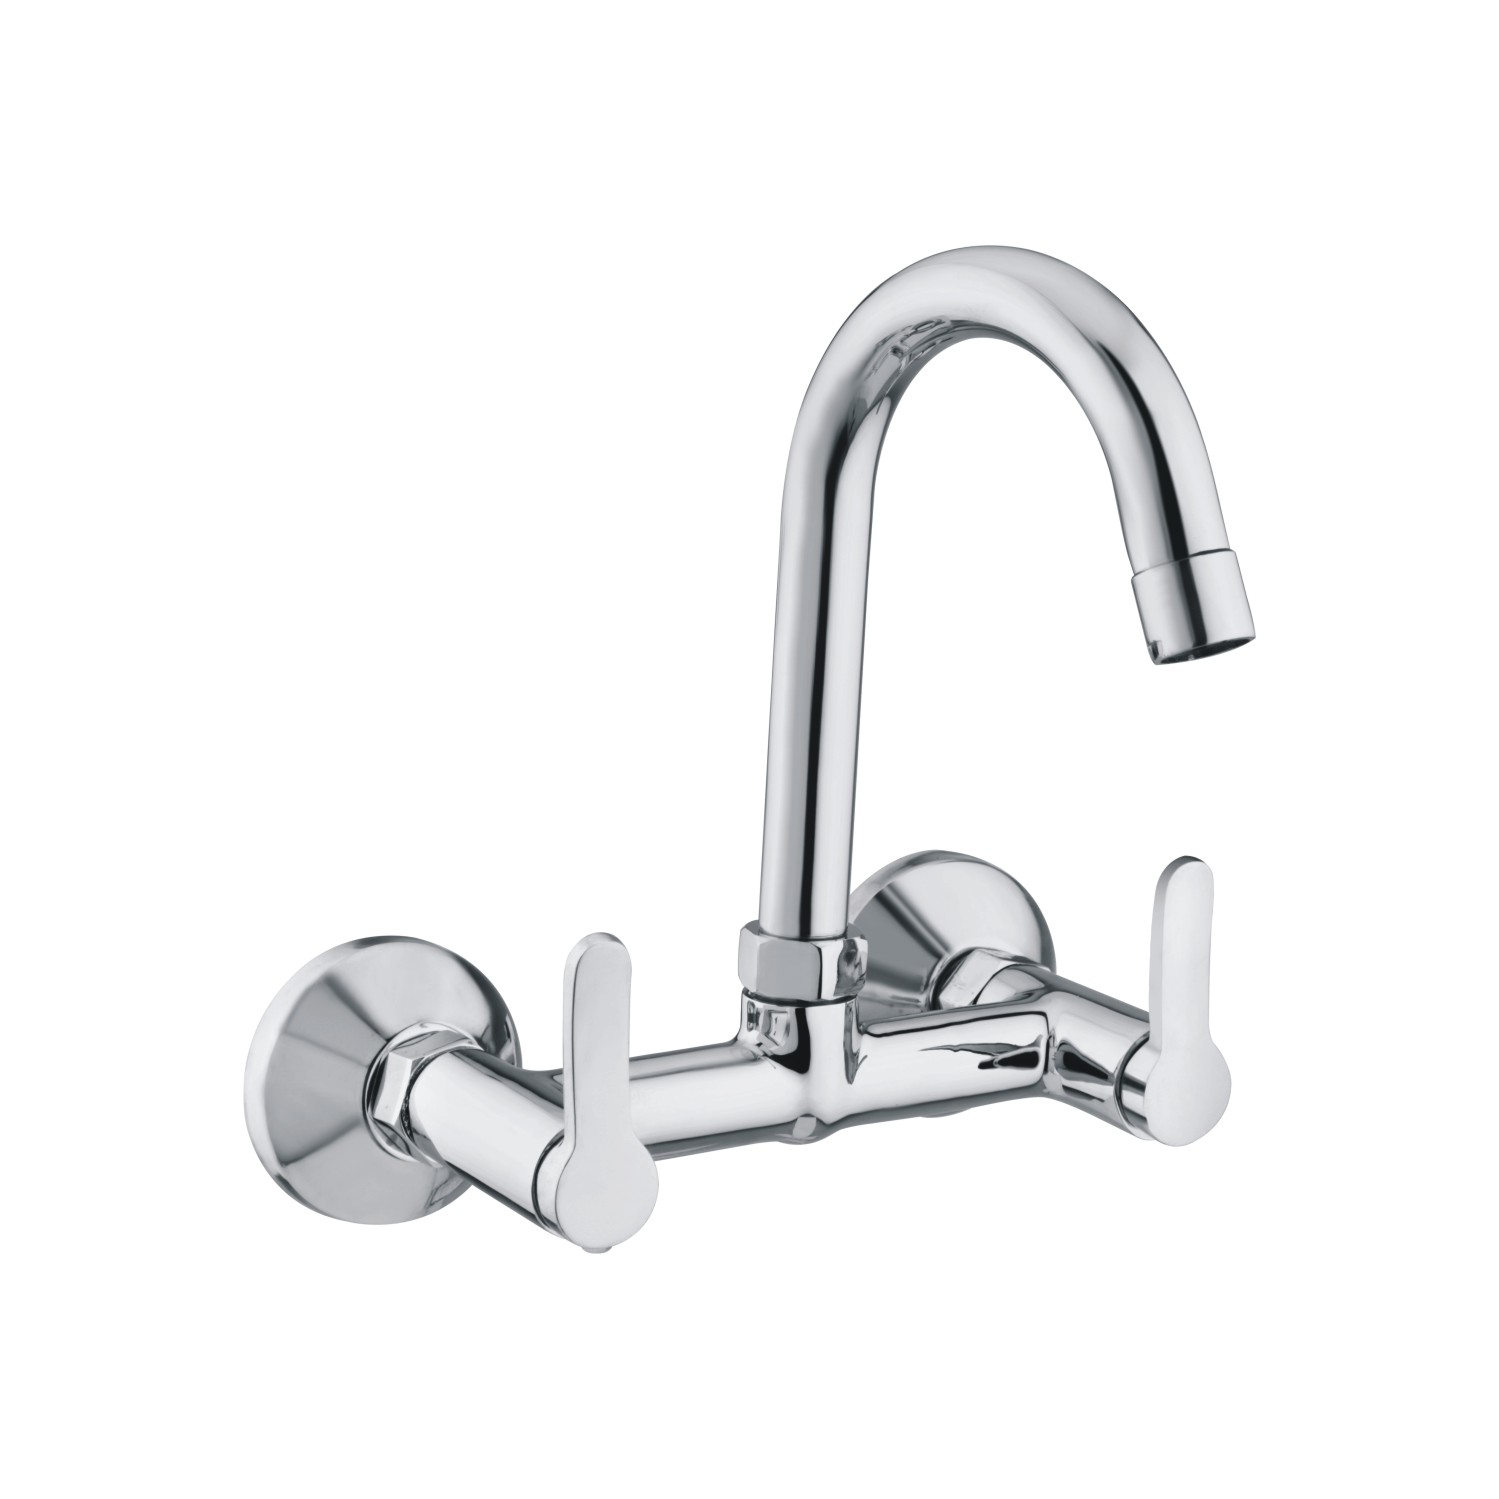 Yaris Sink Mixer with Swivel Spout